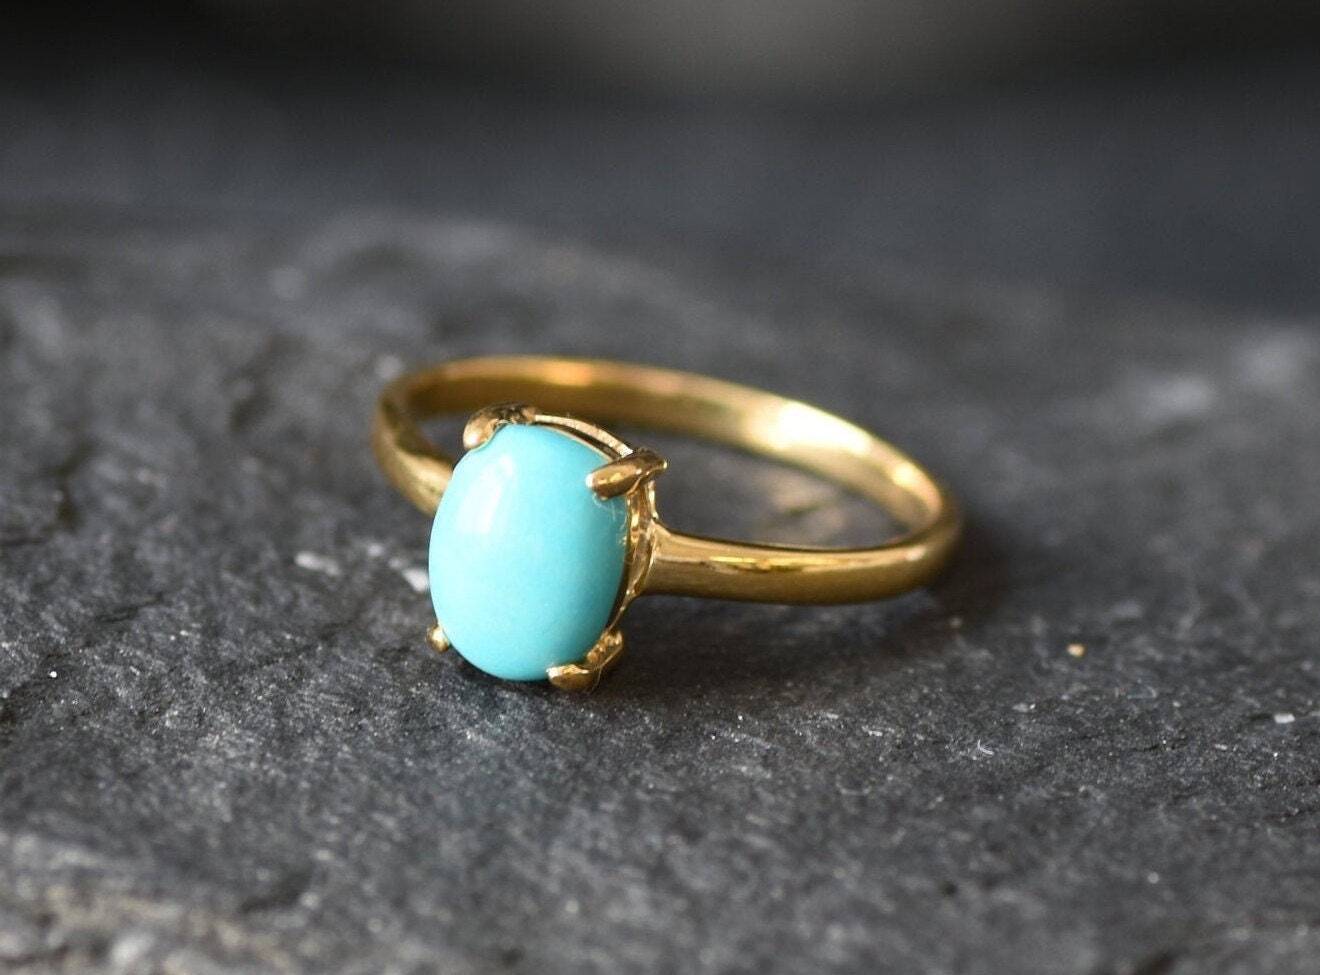 Gold Turquoise Ring, Natural Turquoise, Dainty Blue Ring, December Birthstone, 2 Carat Ring, Solitaire Ring, Gold Vermeil, Arizona Turquoise